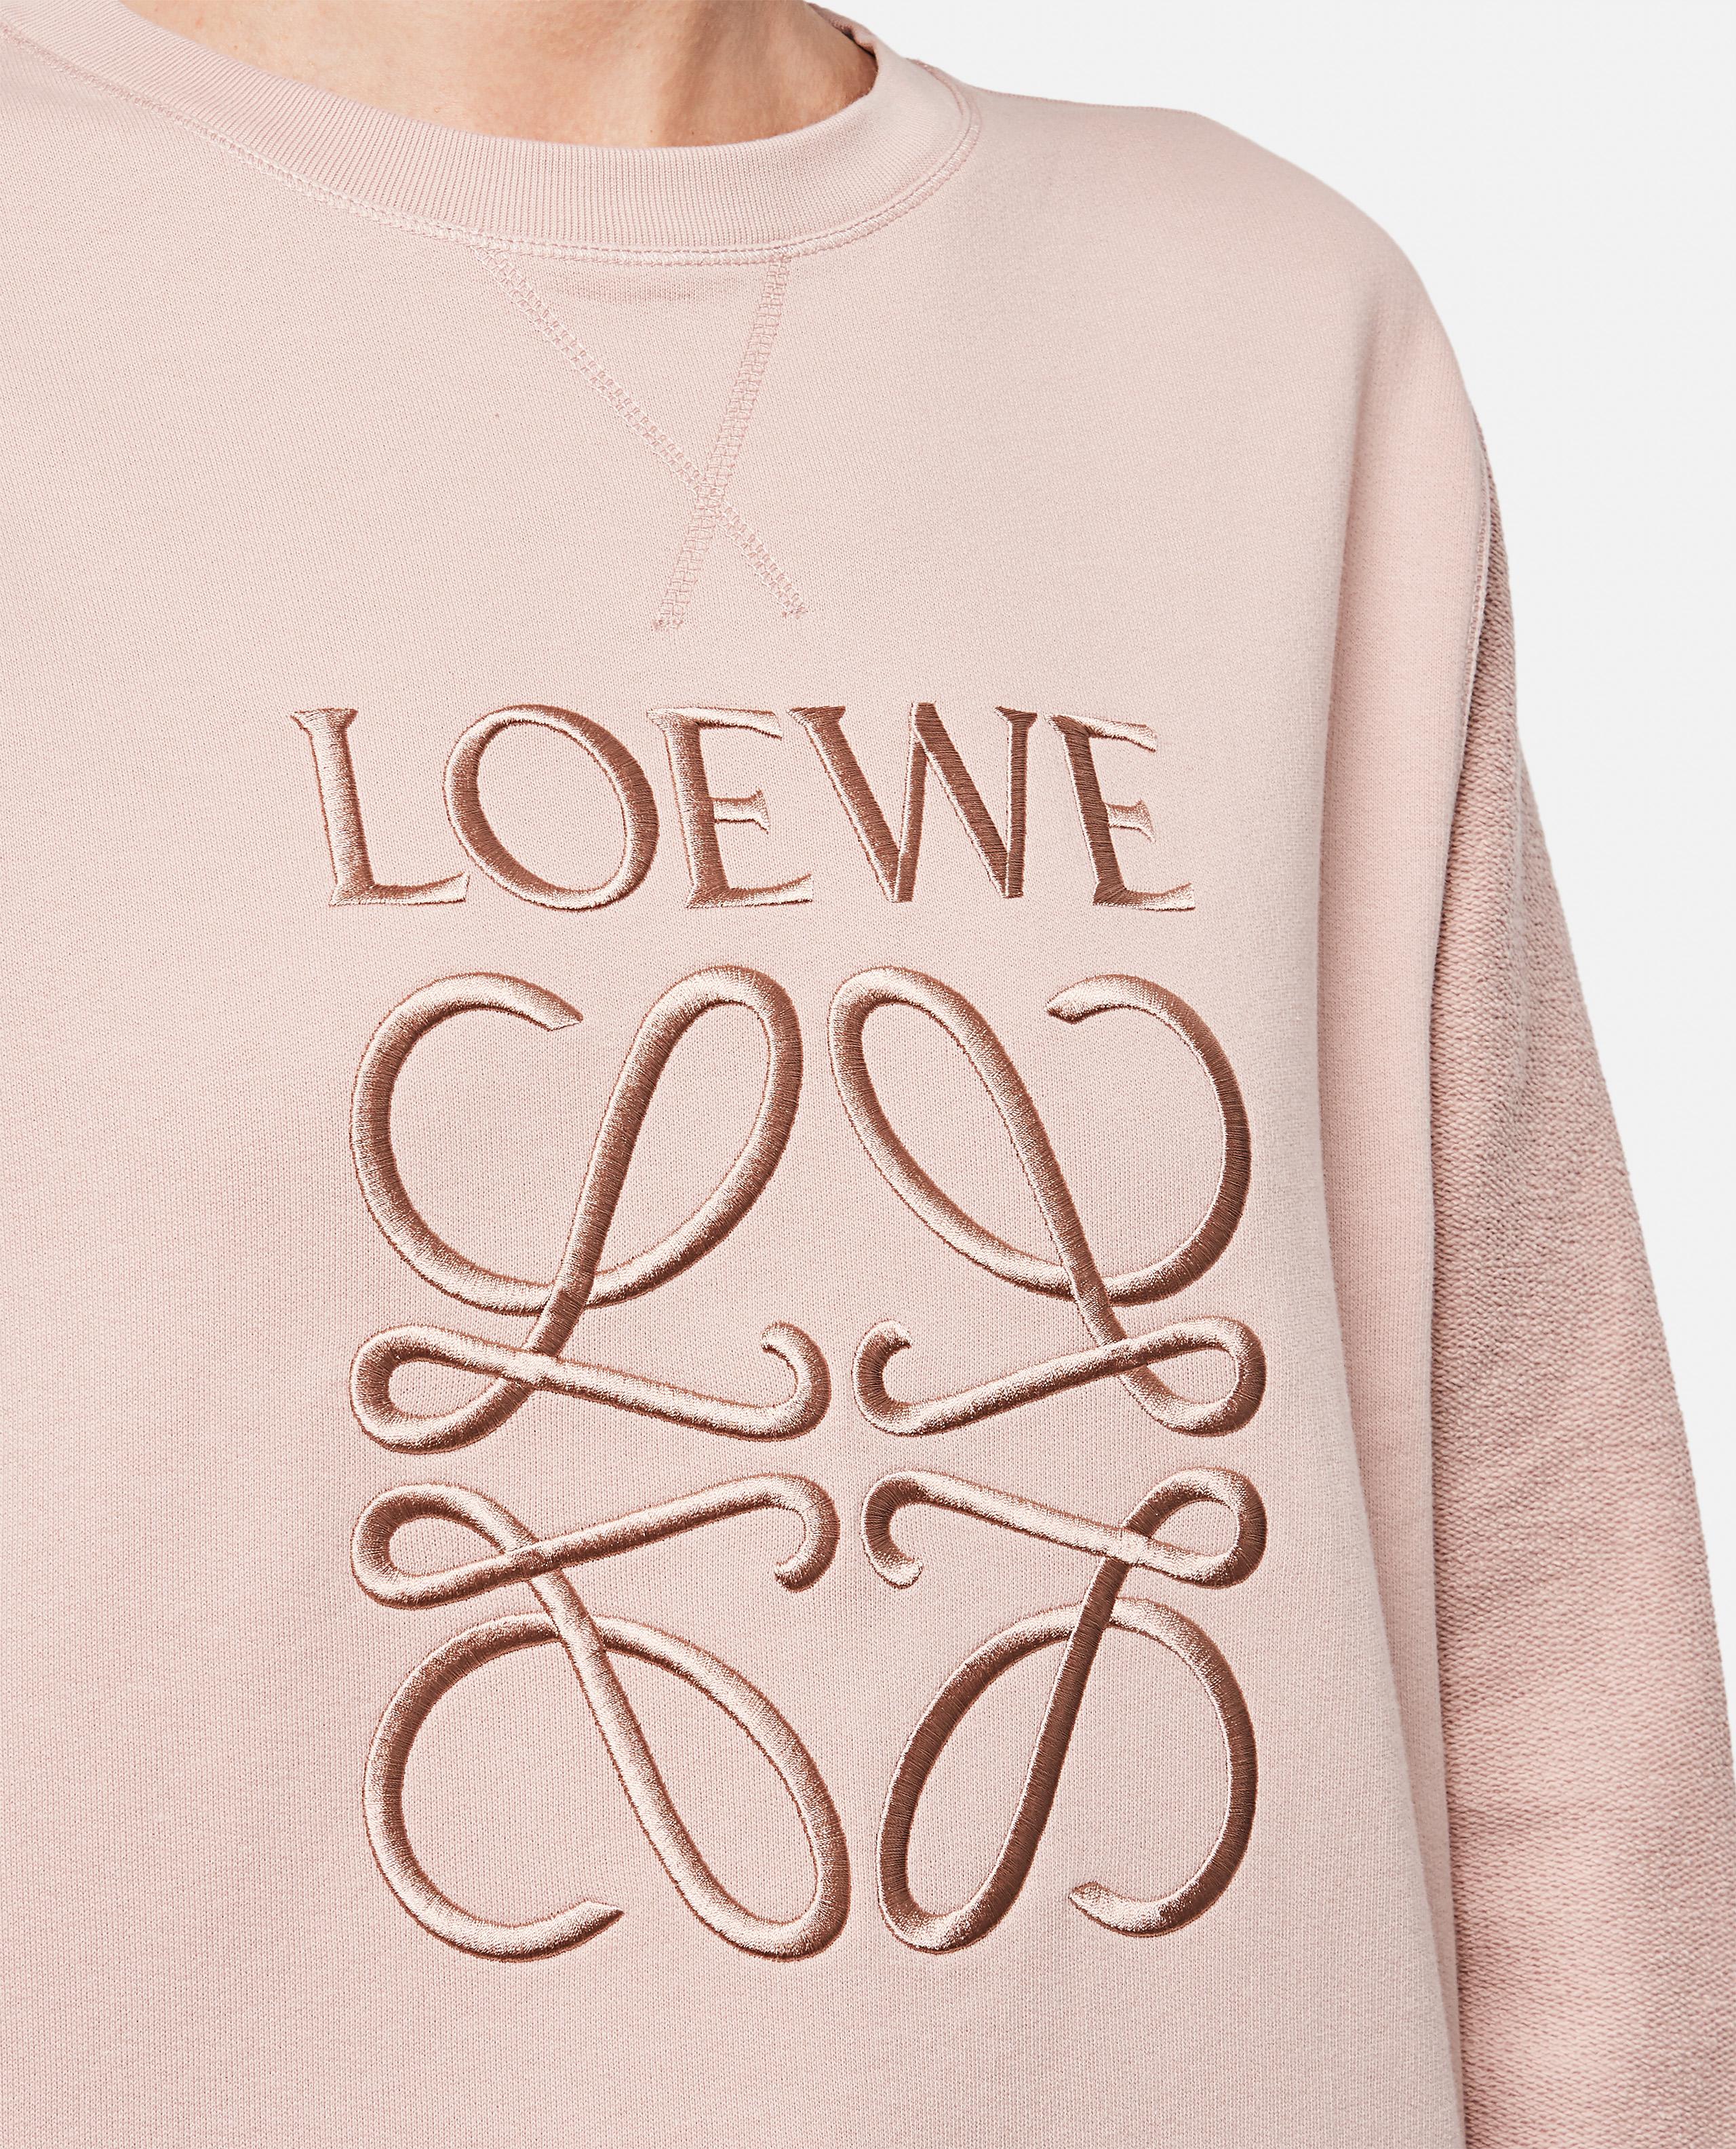 Loewe Sweatshirt With Anagram Embroidery In Cotton in Pink - Lyst